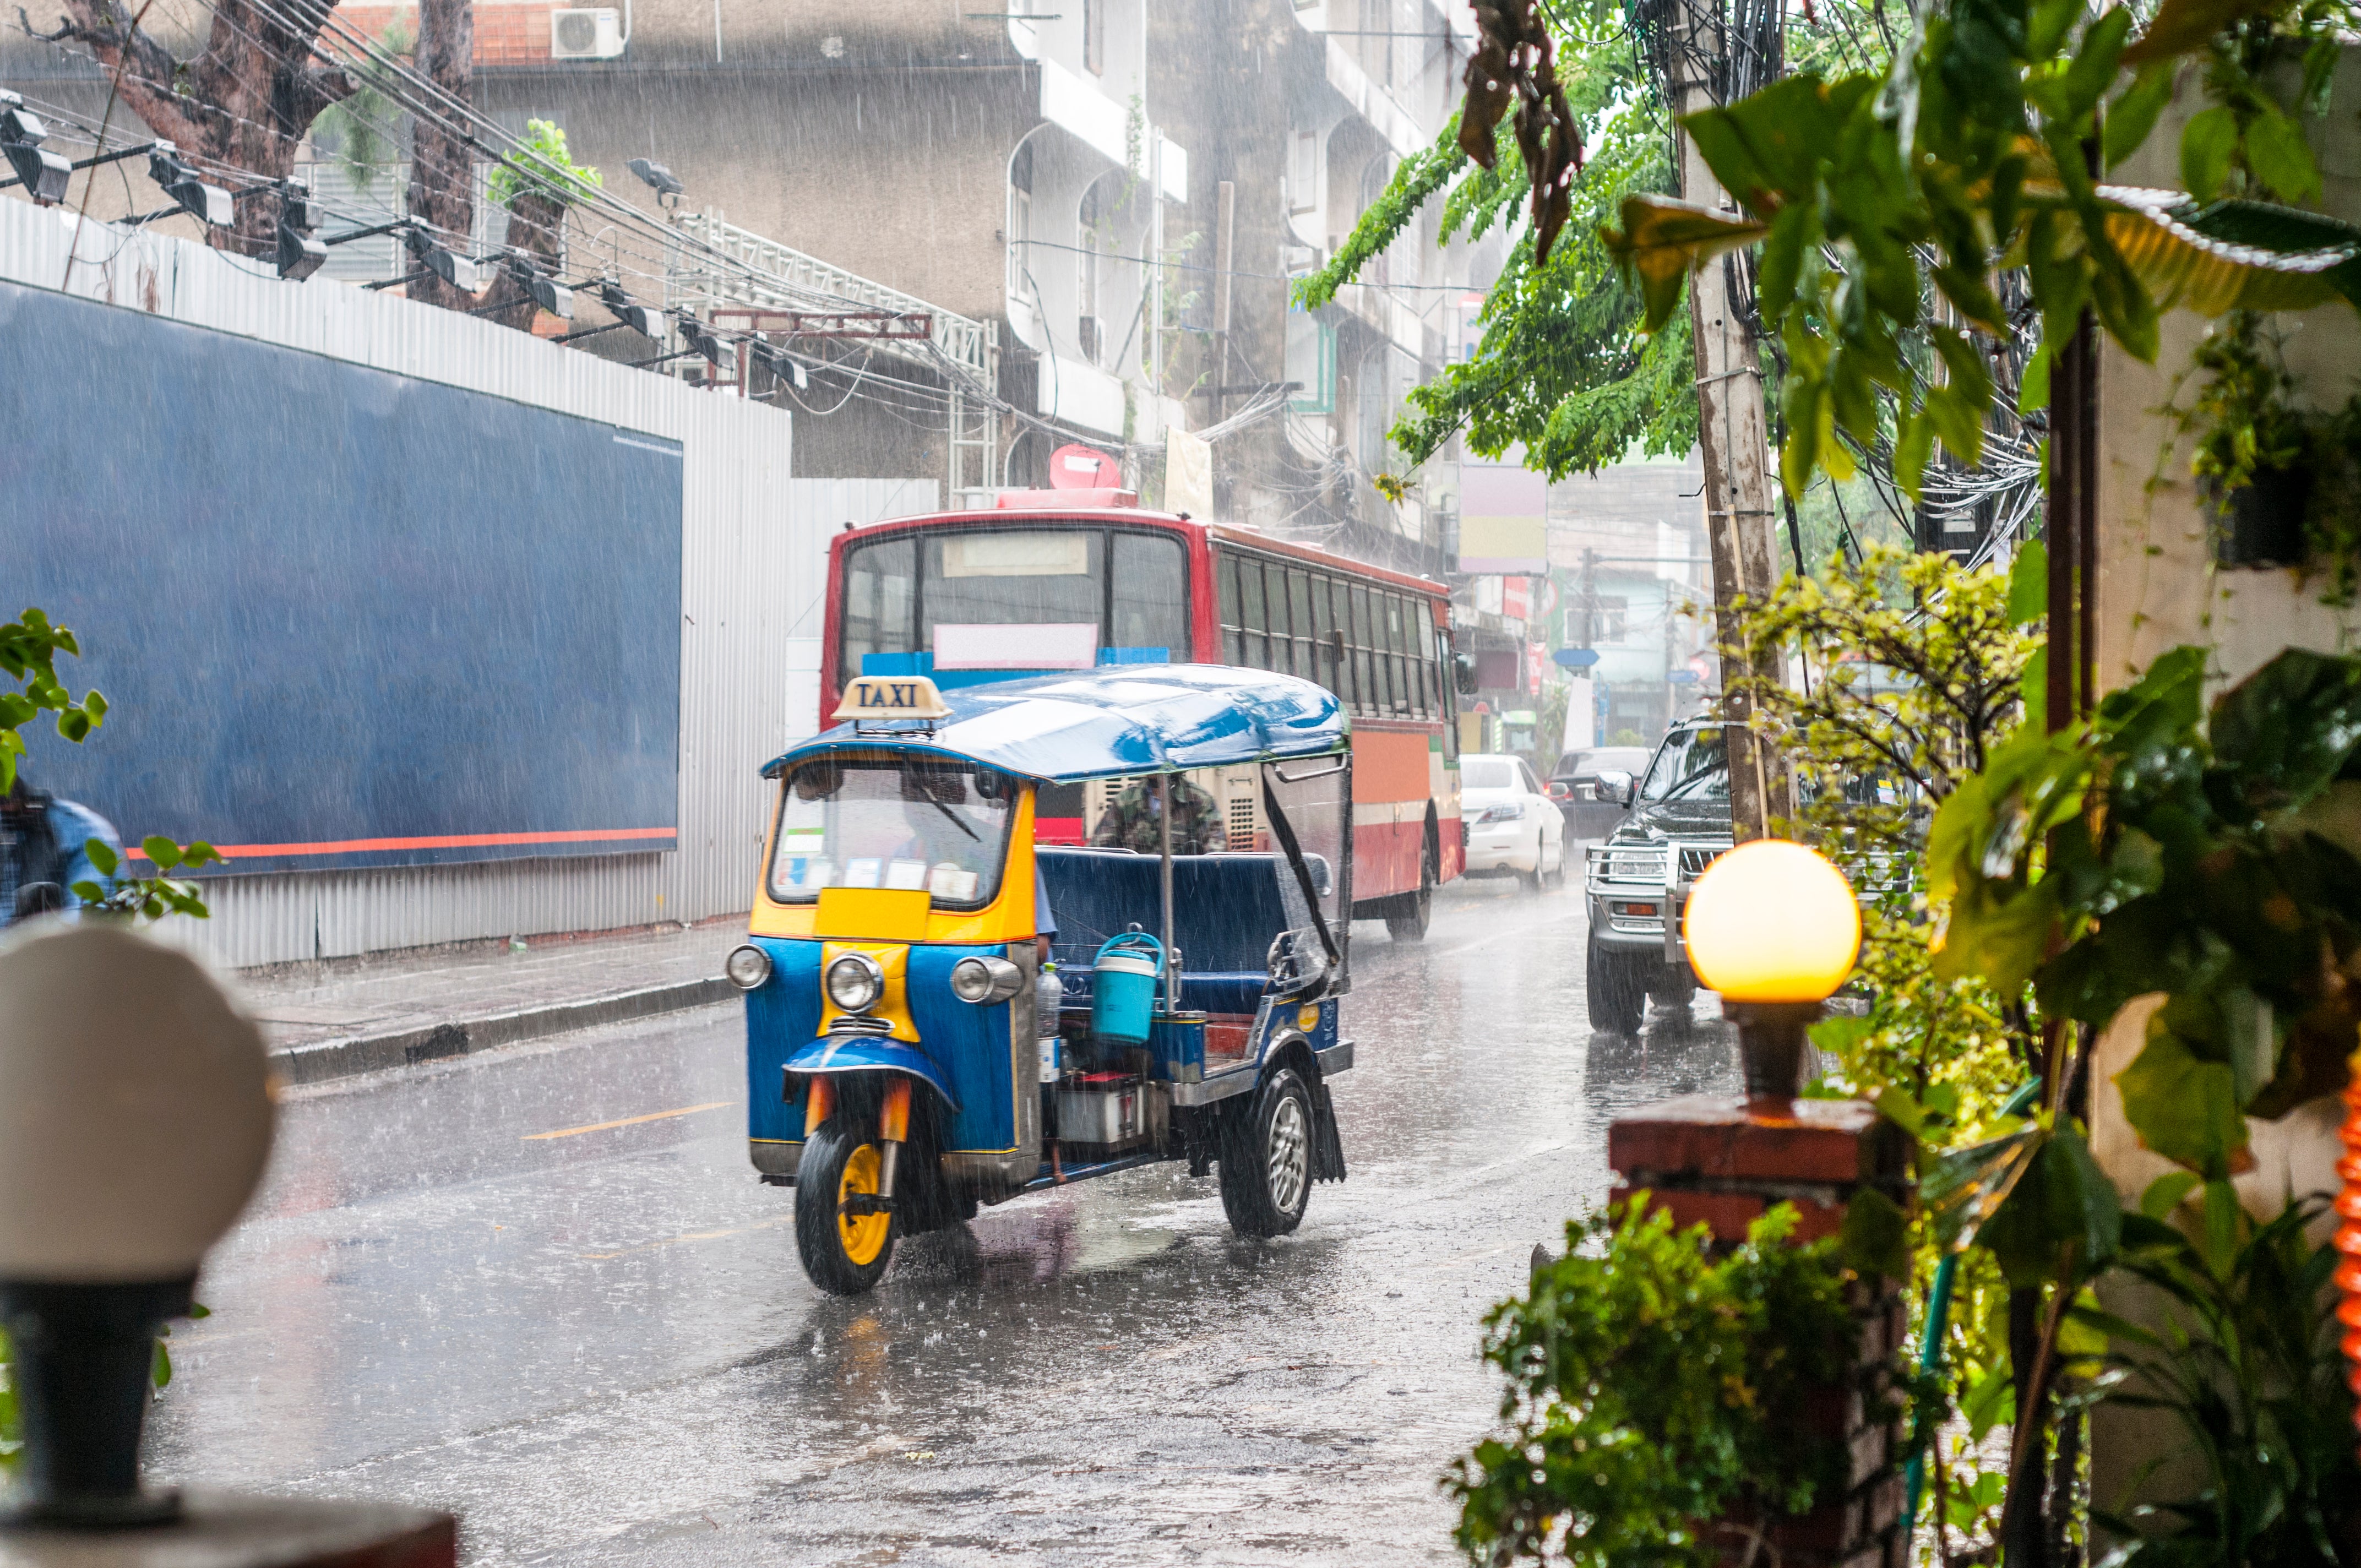 You may need a poncho for Tuk Tuk rides in September